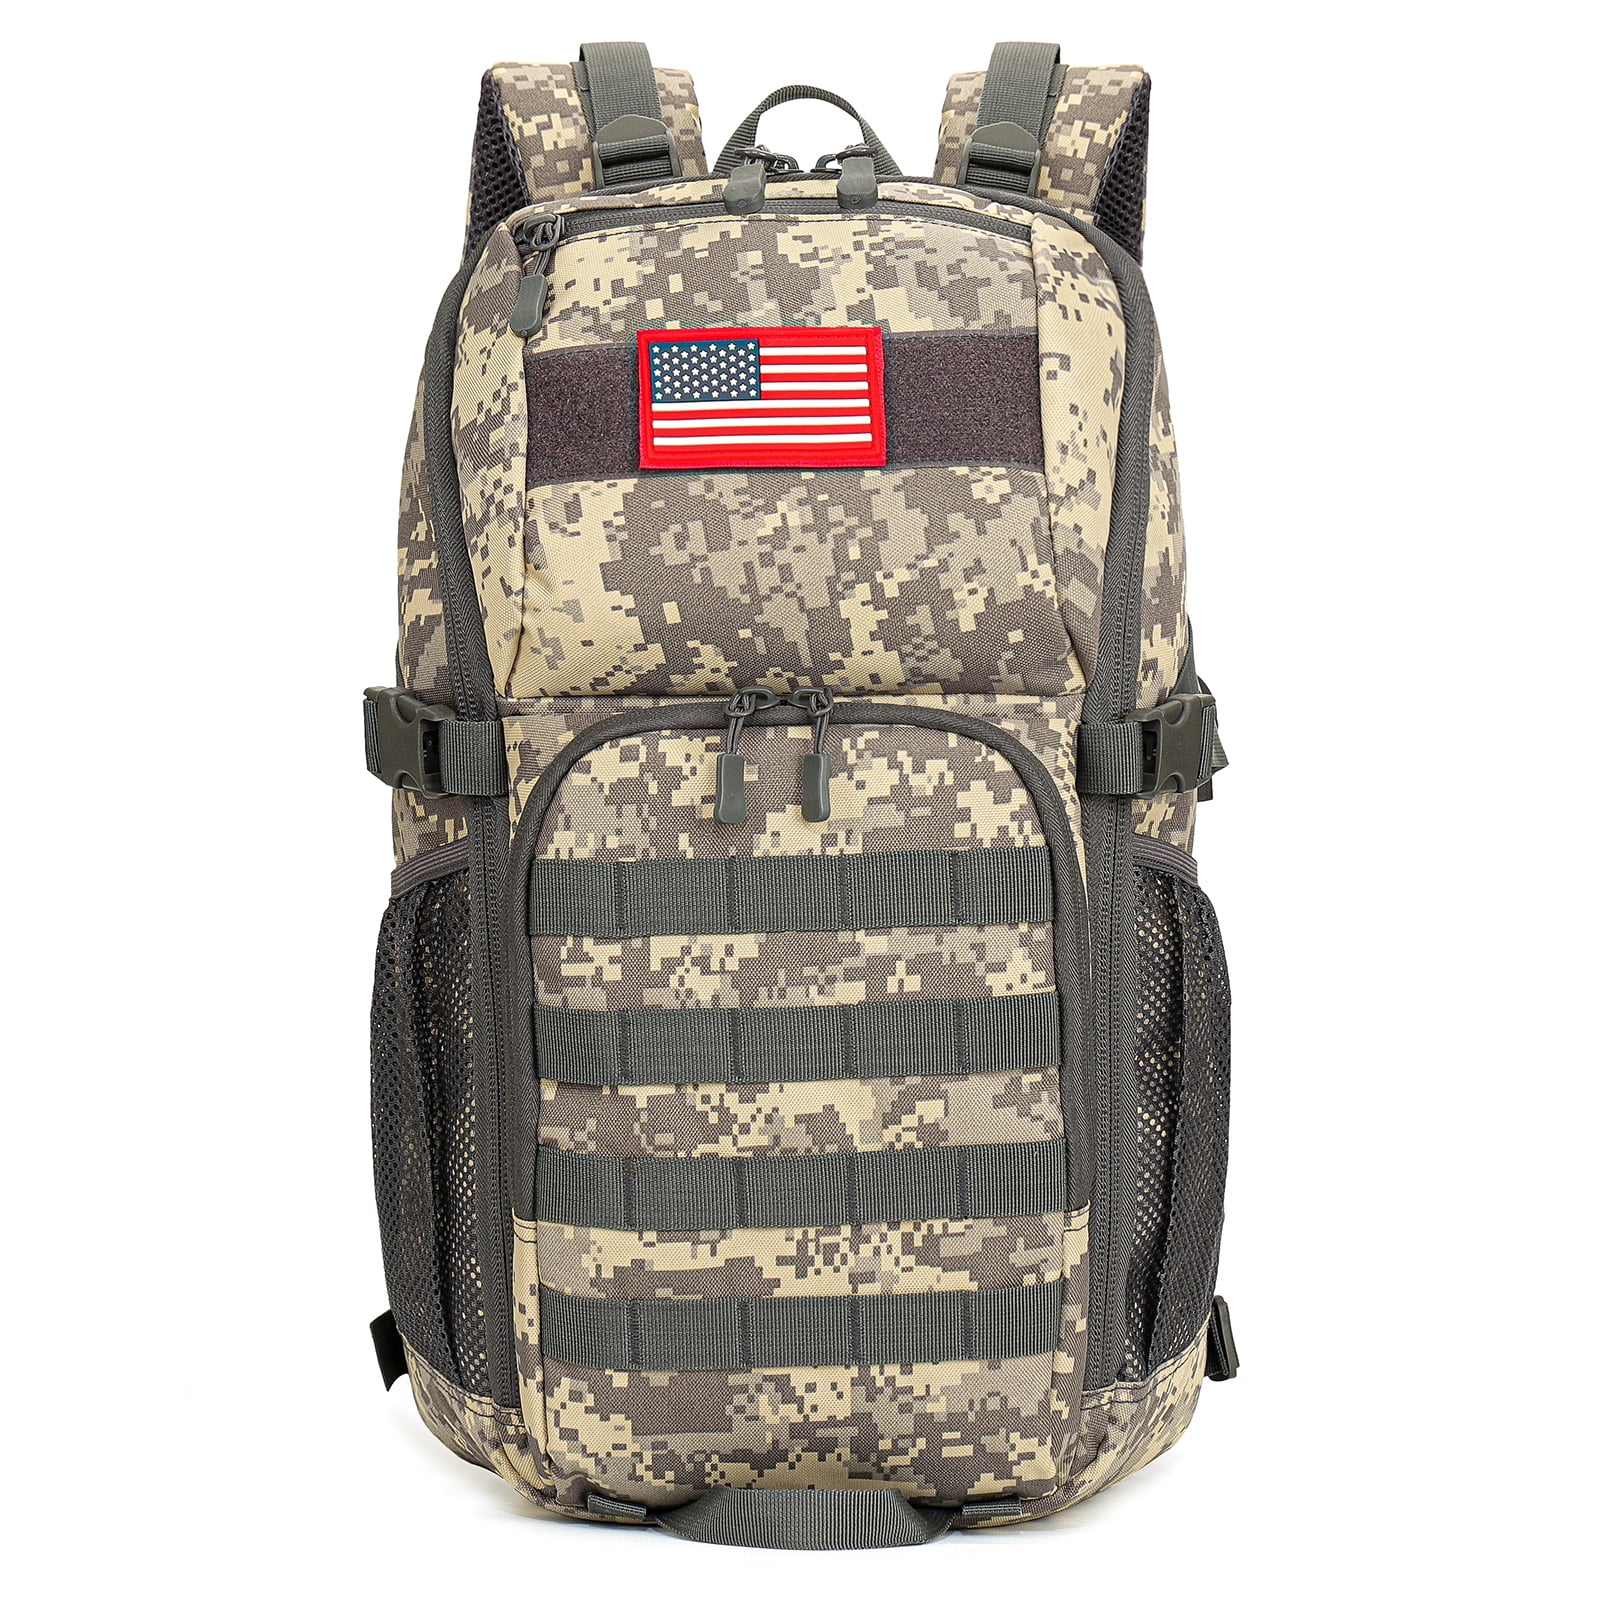 GUESS Women Green Camouflage Print Backpack Price in India, Full  Specifications & Offers | DTashion.com